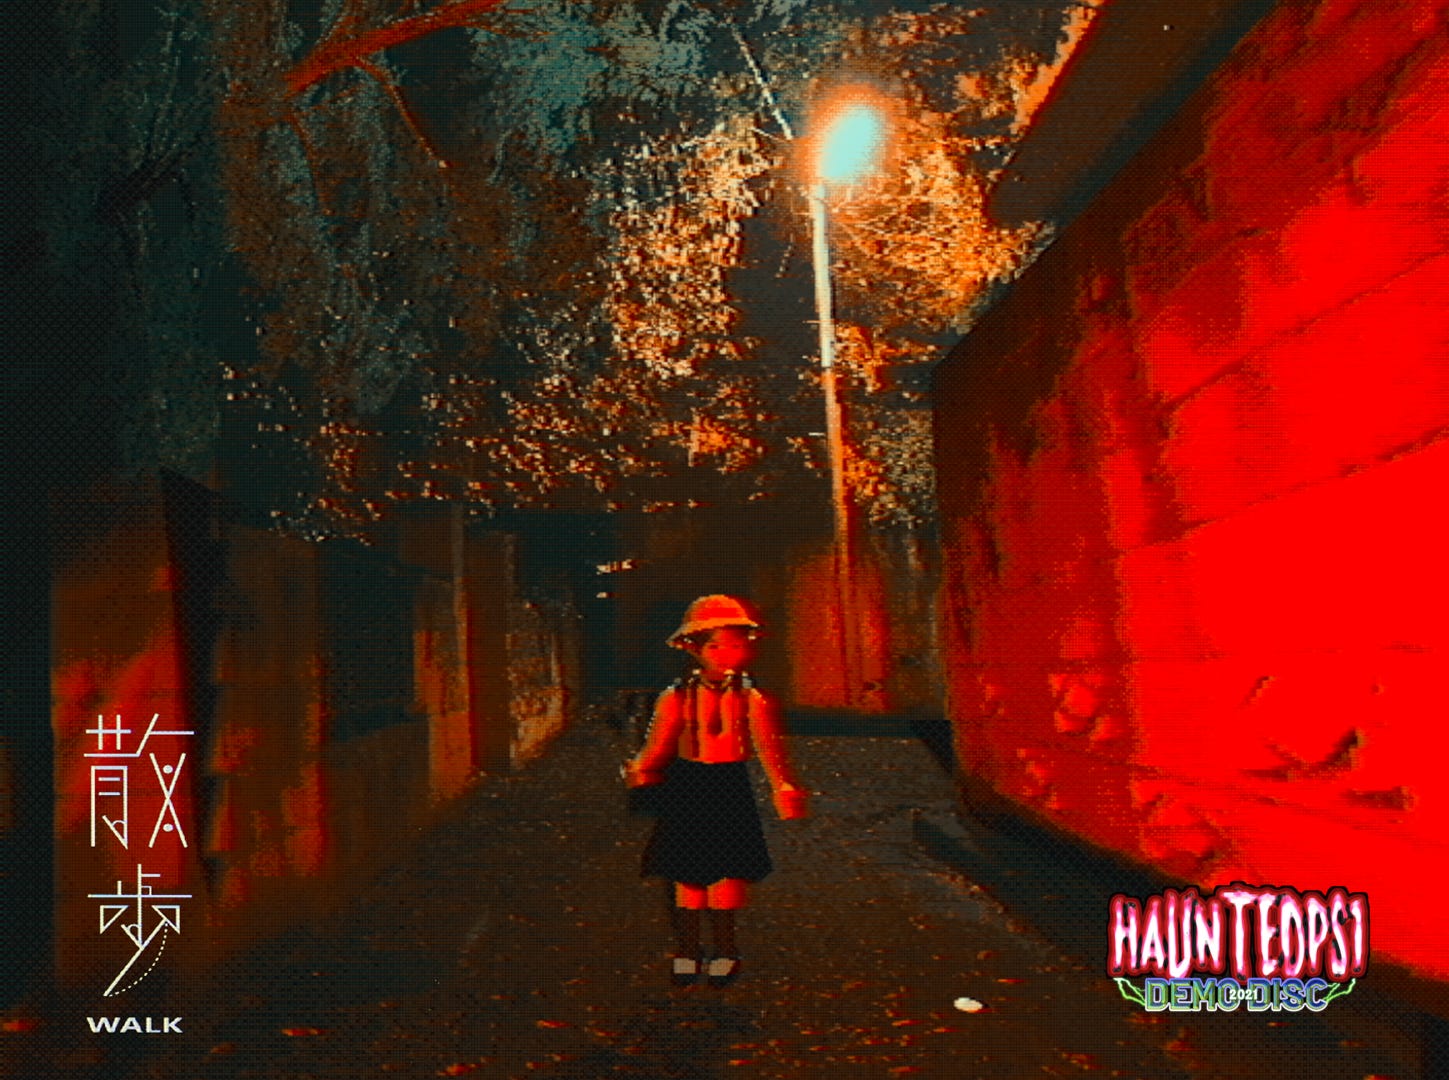 A girl in a japanese school uniform walks through an alley at night. A streetlight is lit behind her and the alley is bathed in red. The resolution is low, making the details blurry and hard to see. The title "Walk" is written in the corner in both English and Japanese.